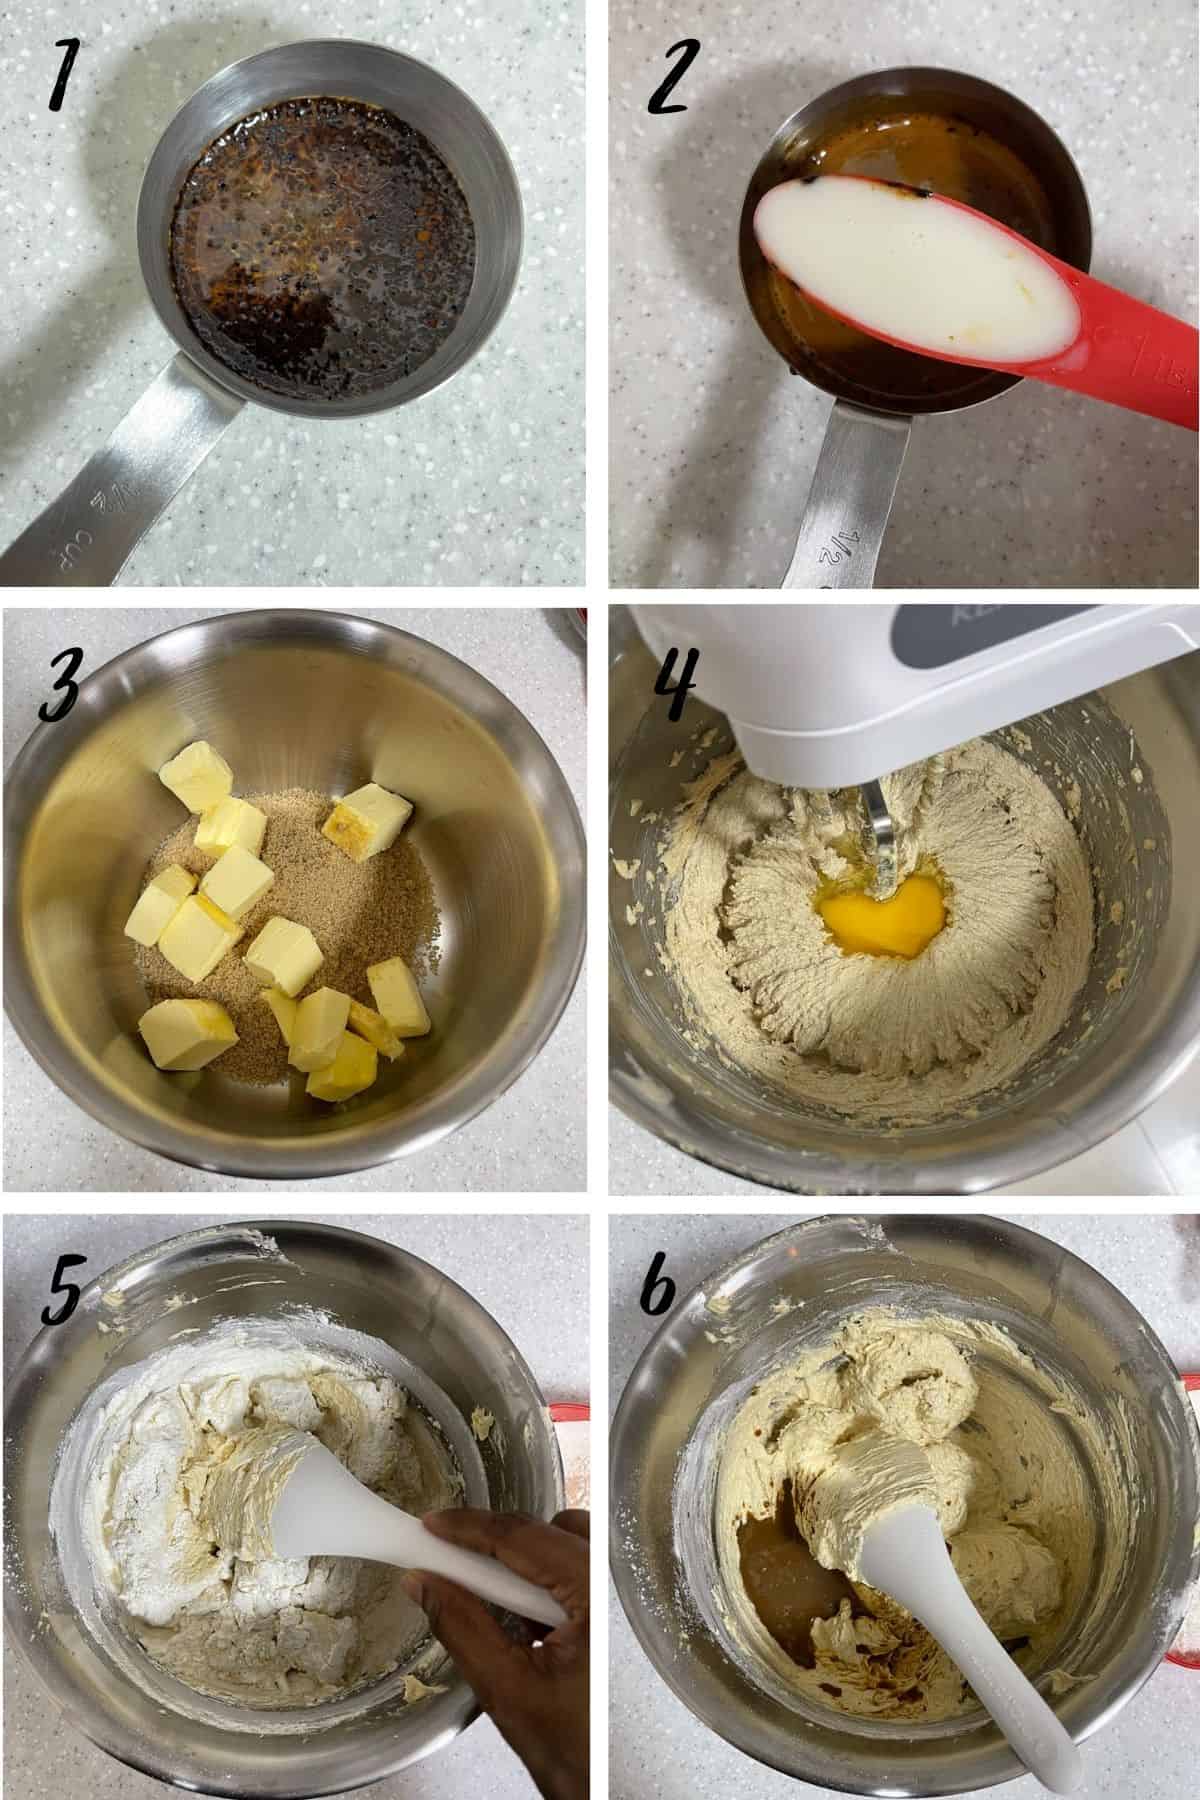 A poster of 6 images showing how to mix instant coffee cake batter